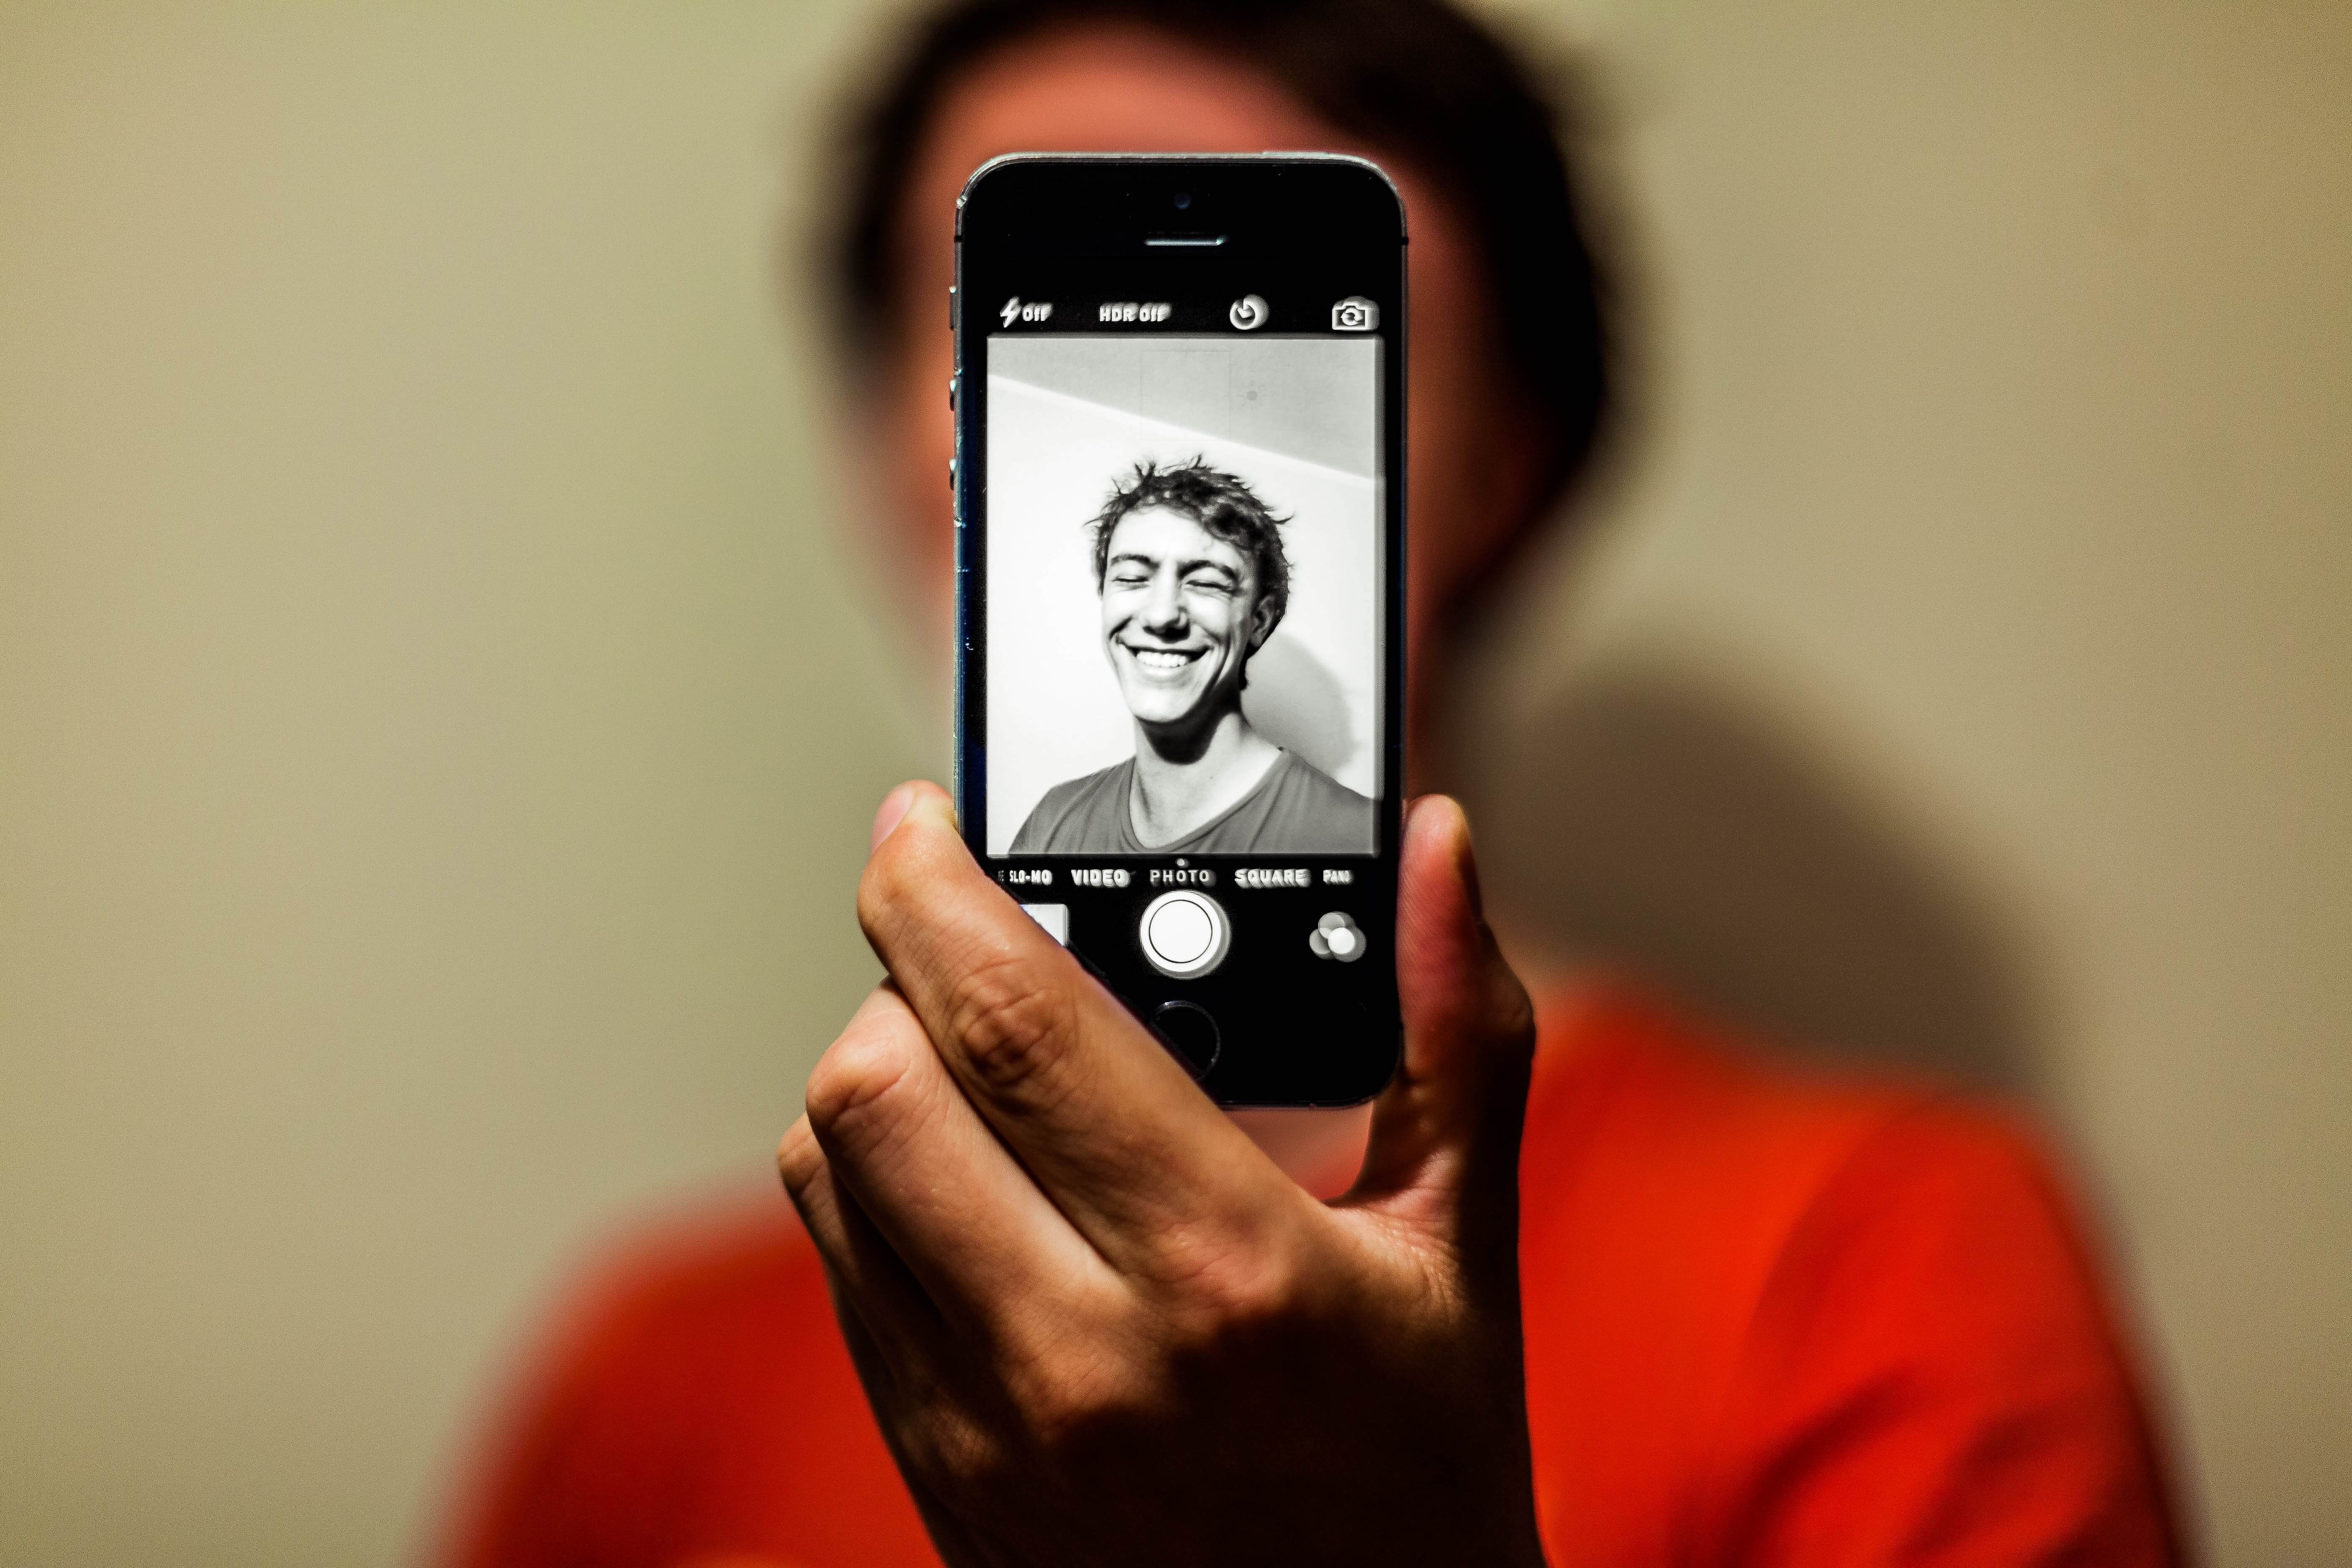 A young man taking a black and white selfie